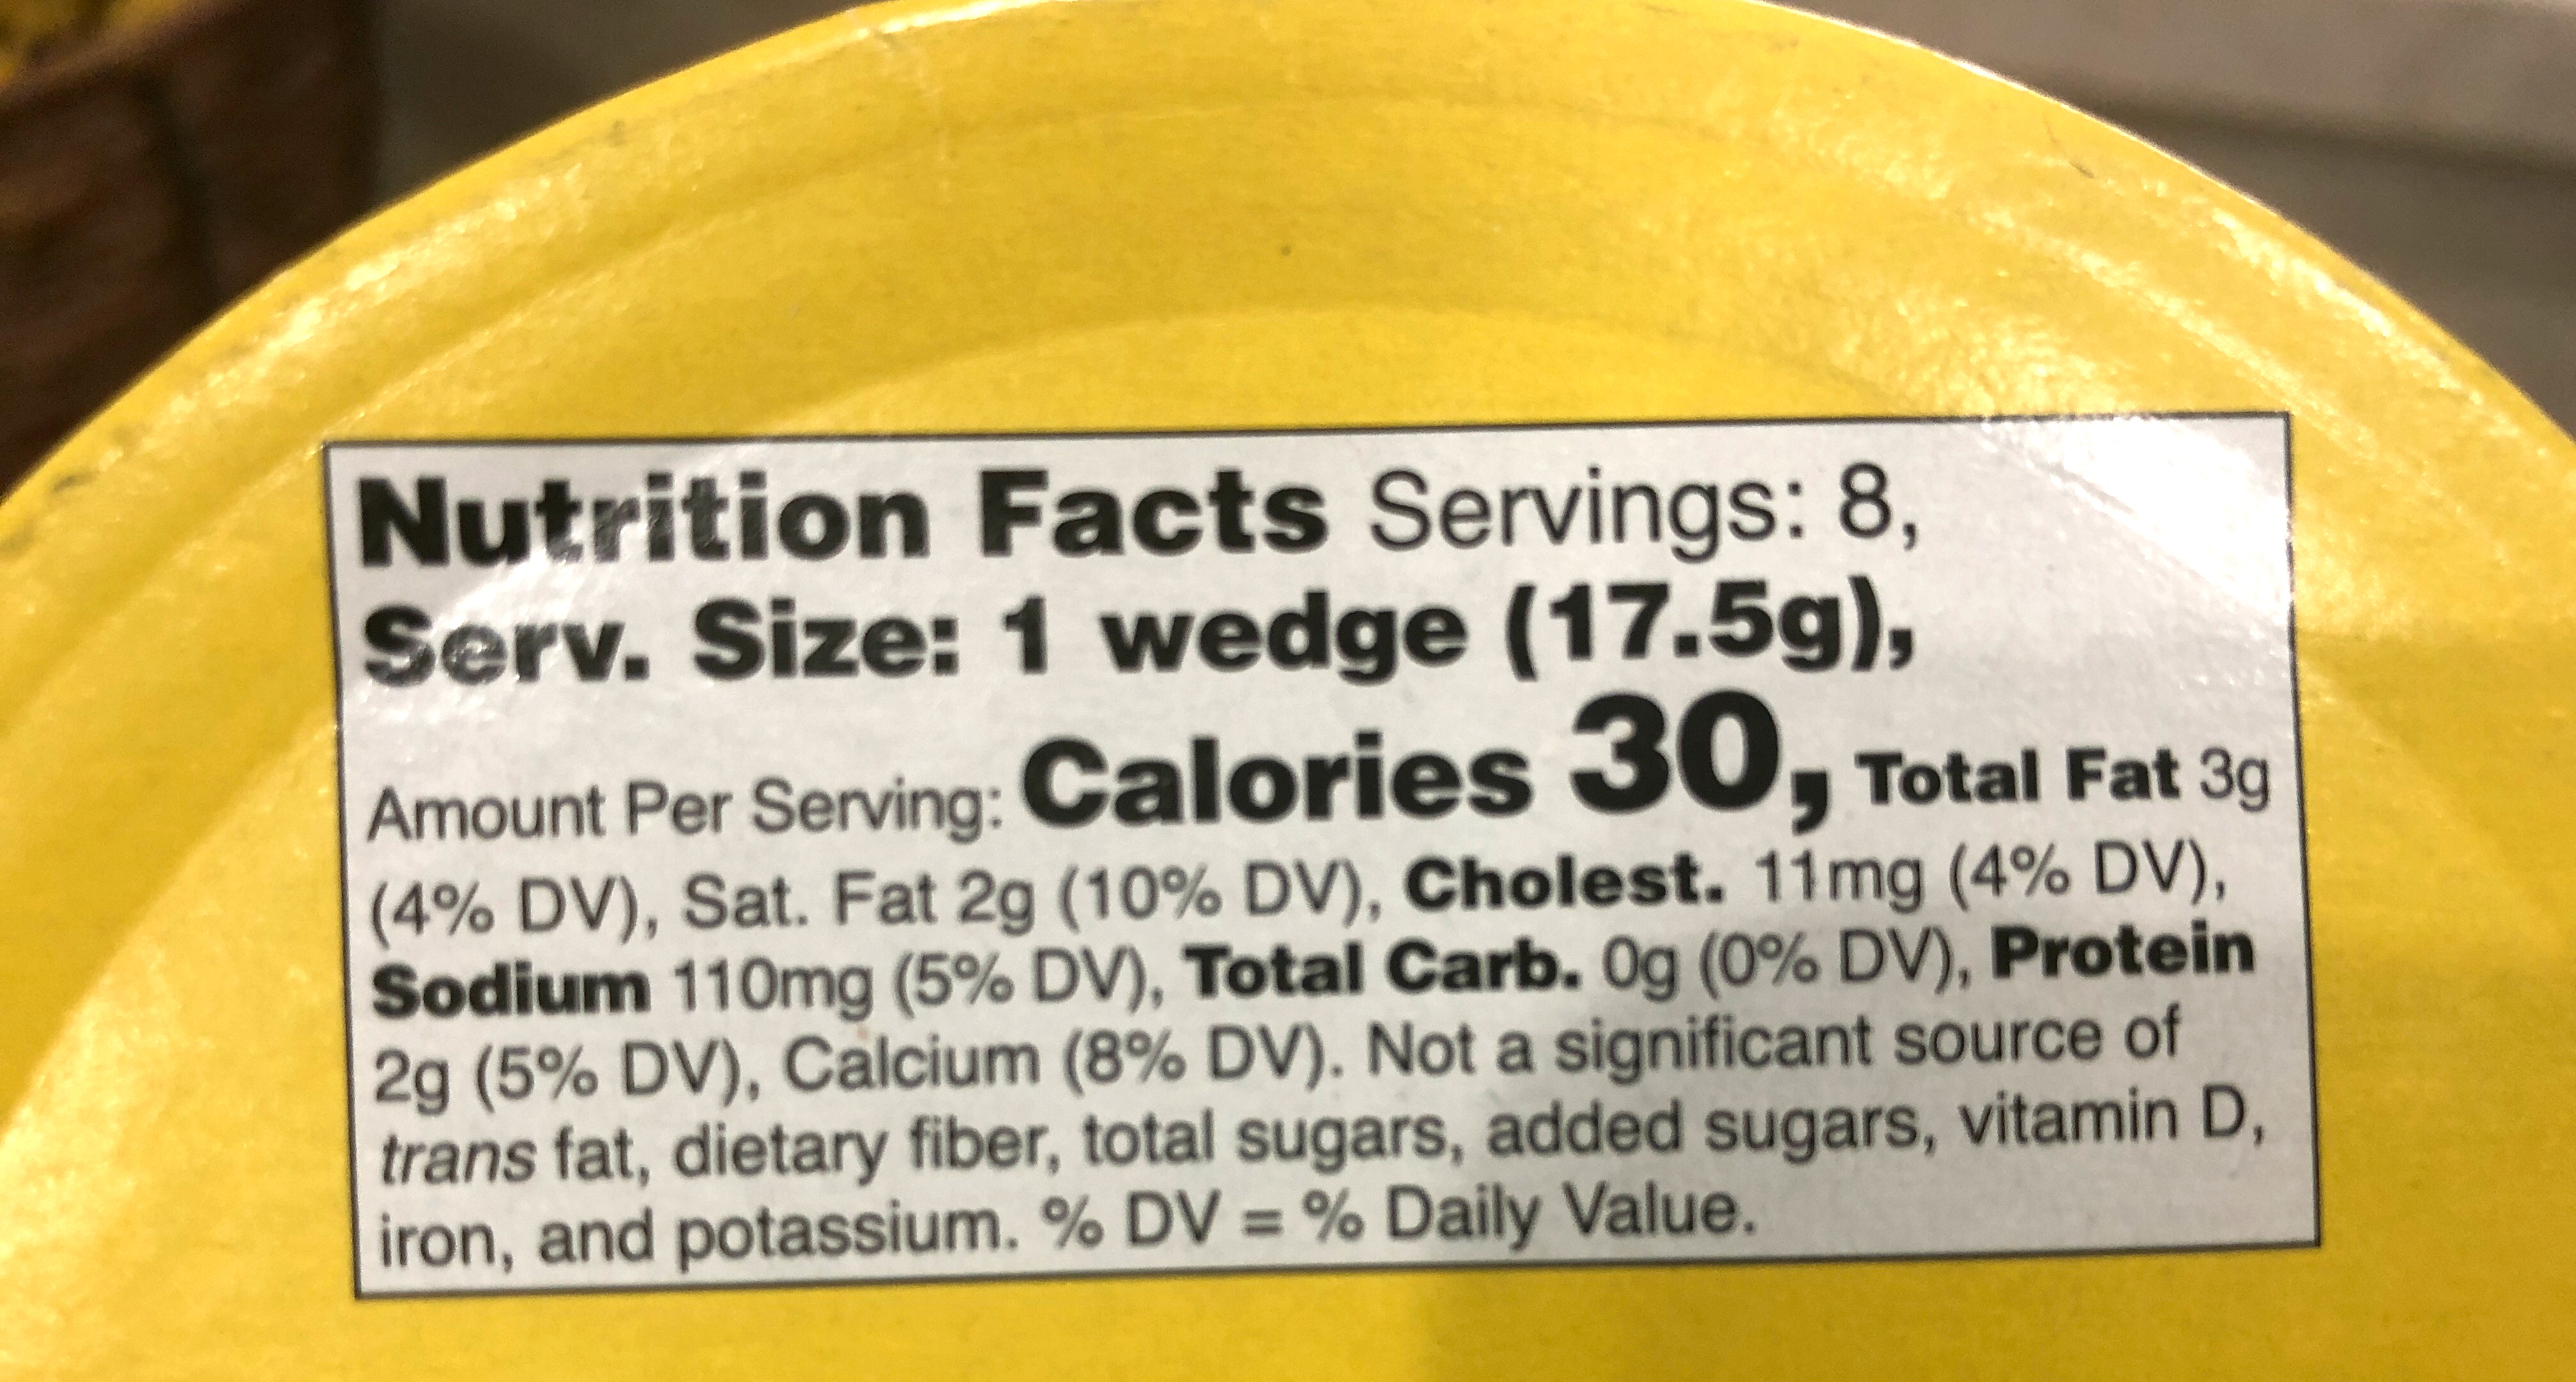 Nutritional label for keto Kerrygold Dubliner cheese wedges